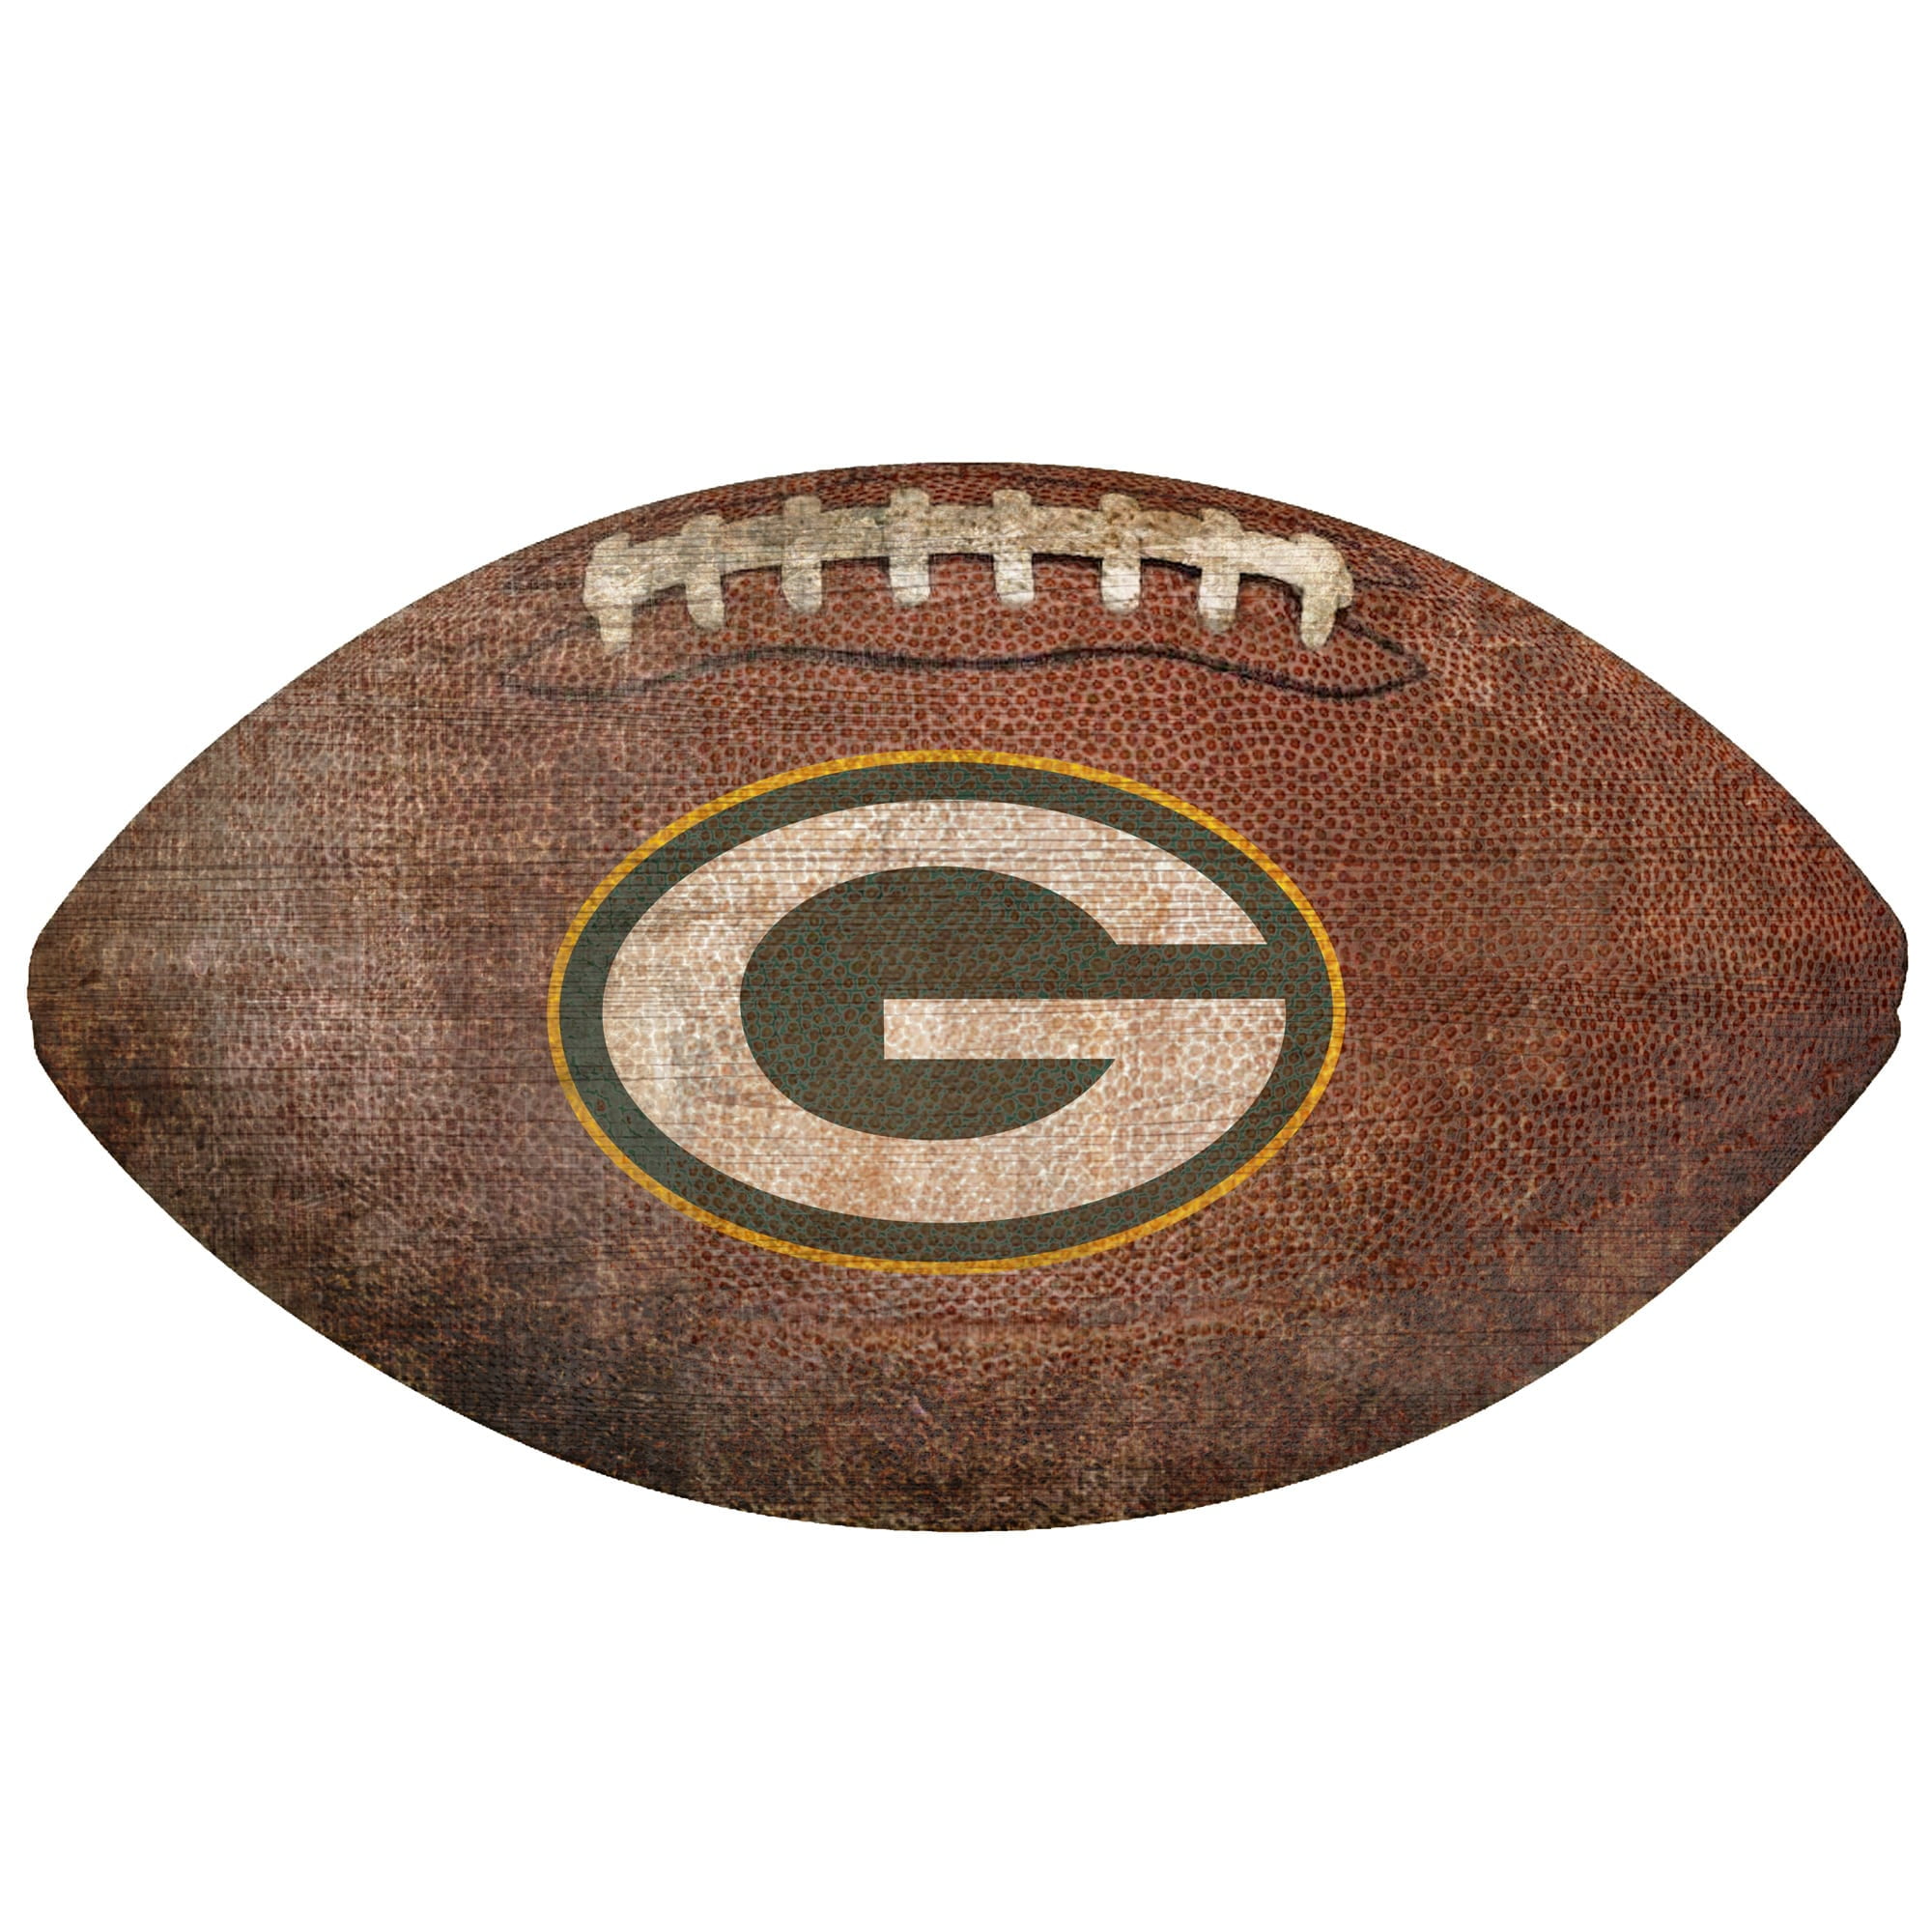 Green Bay Packers Super Bowl XLV Champions Composite - Item